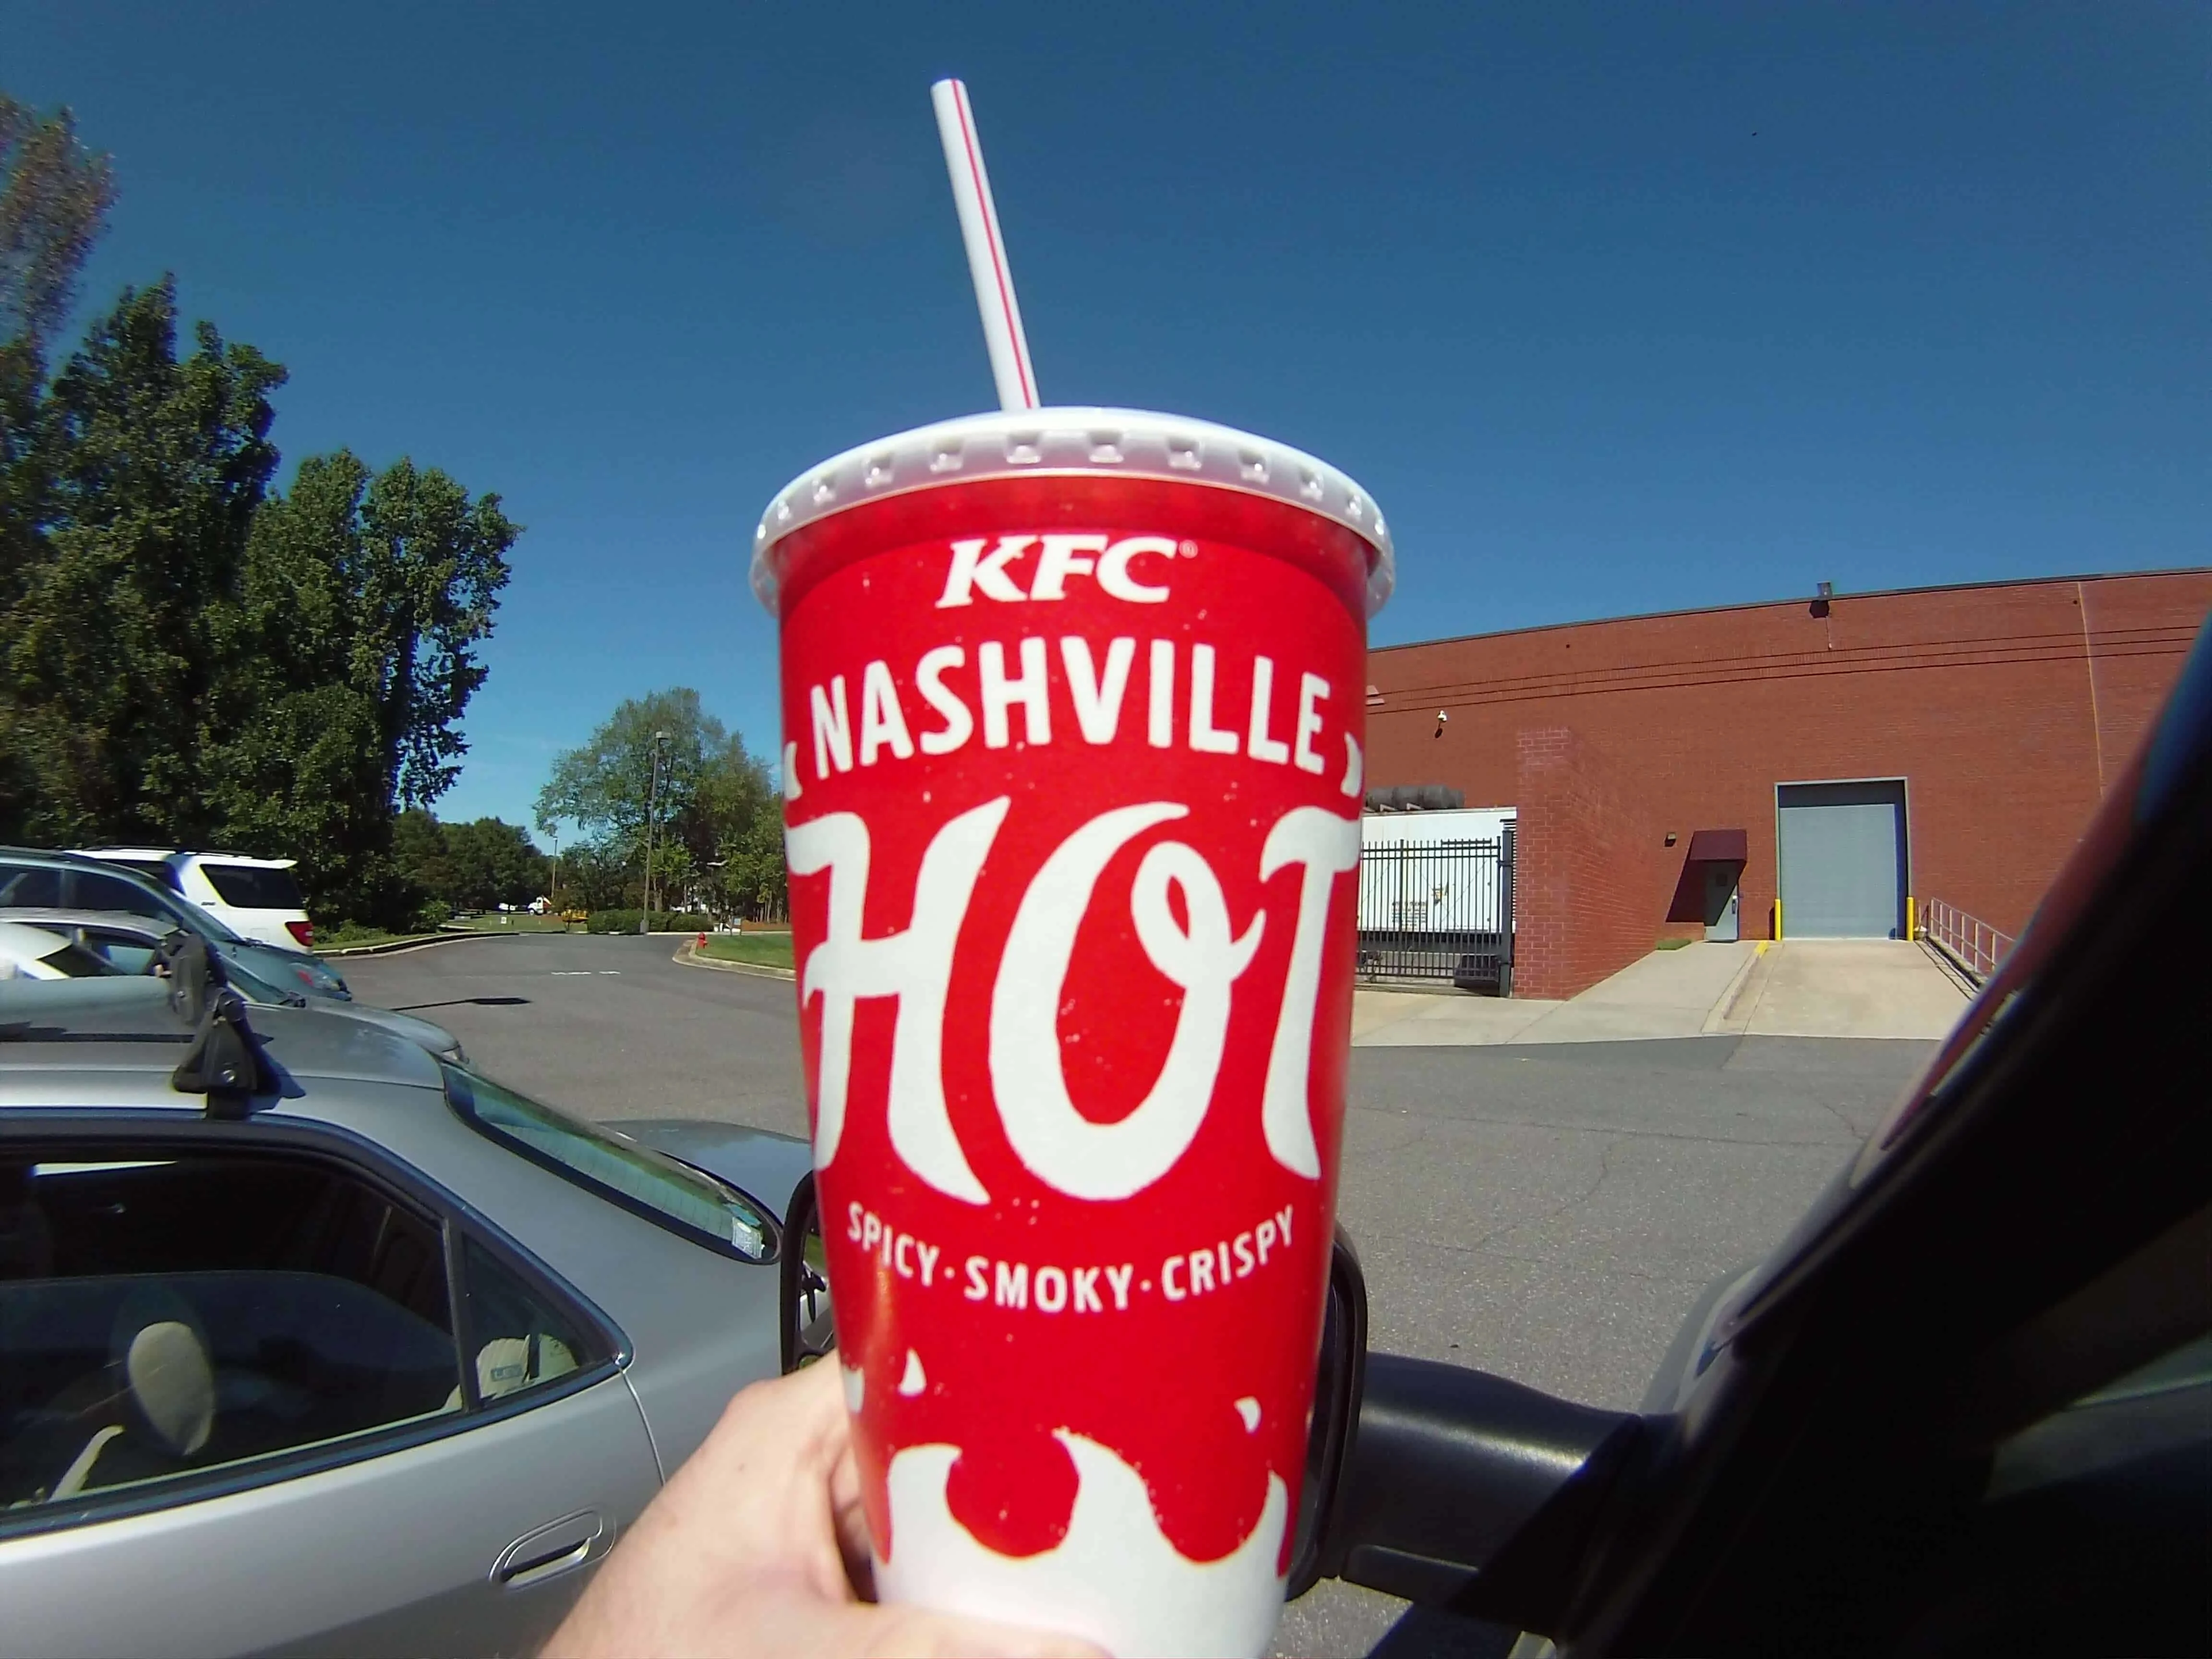 This is a image of a cup from KFC showing advertisment for the Nashville Hot Chicken.